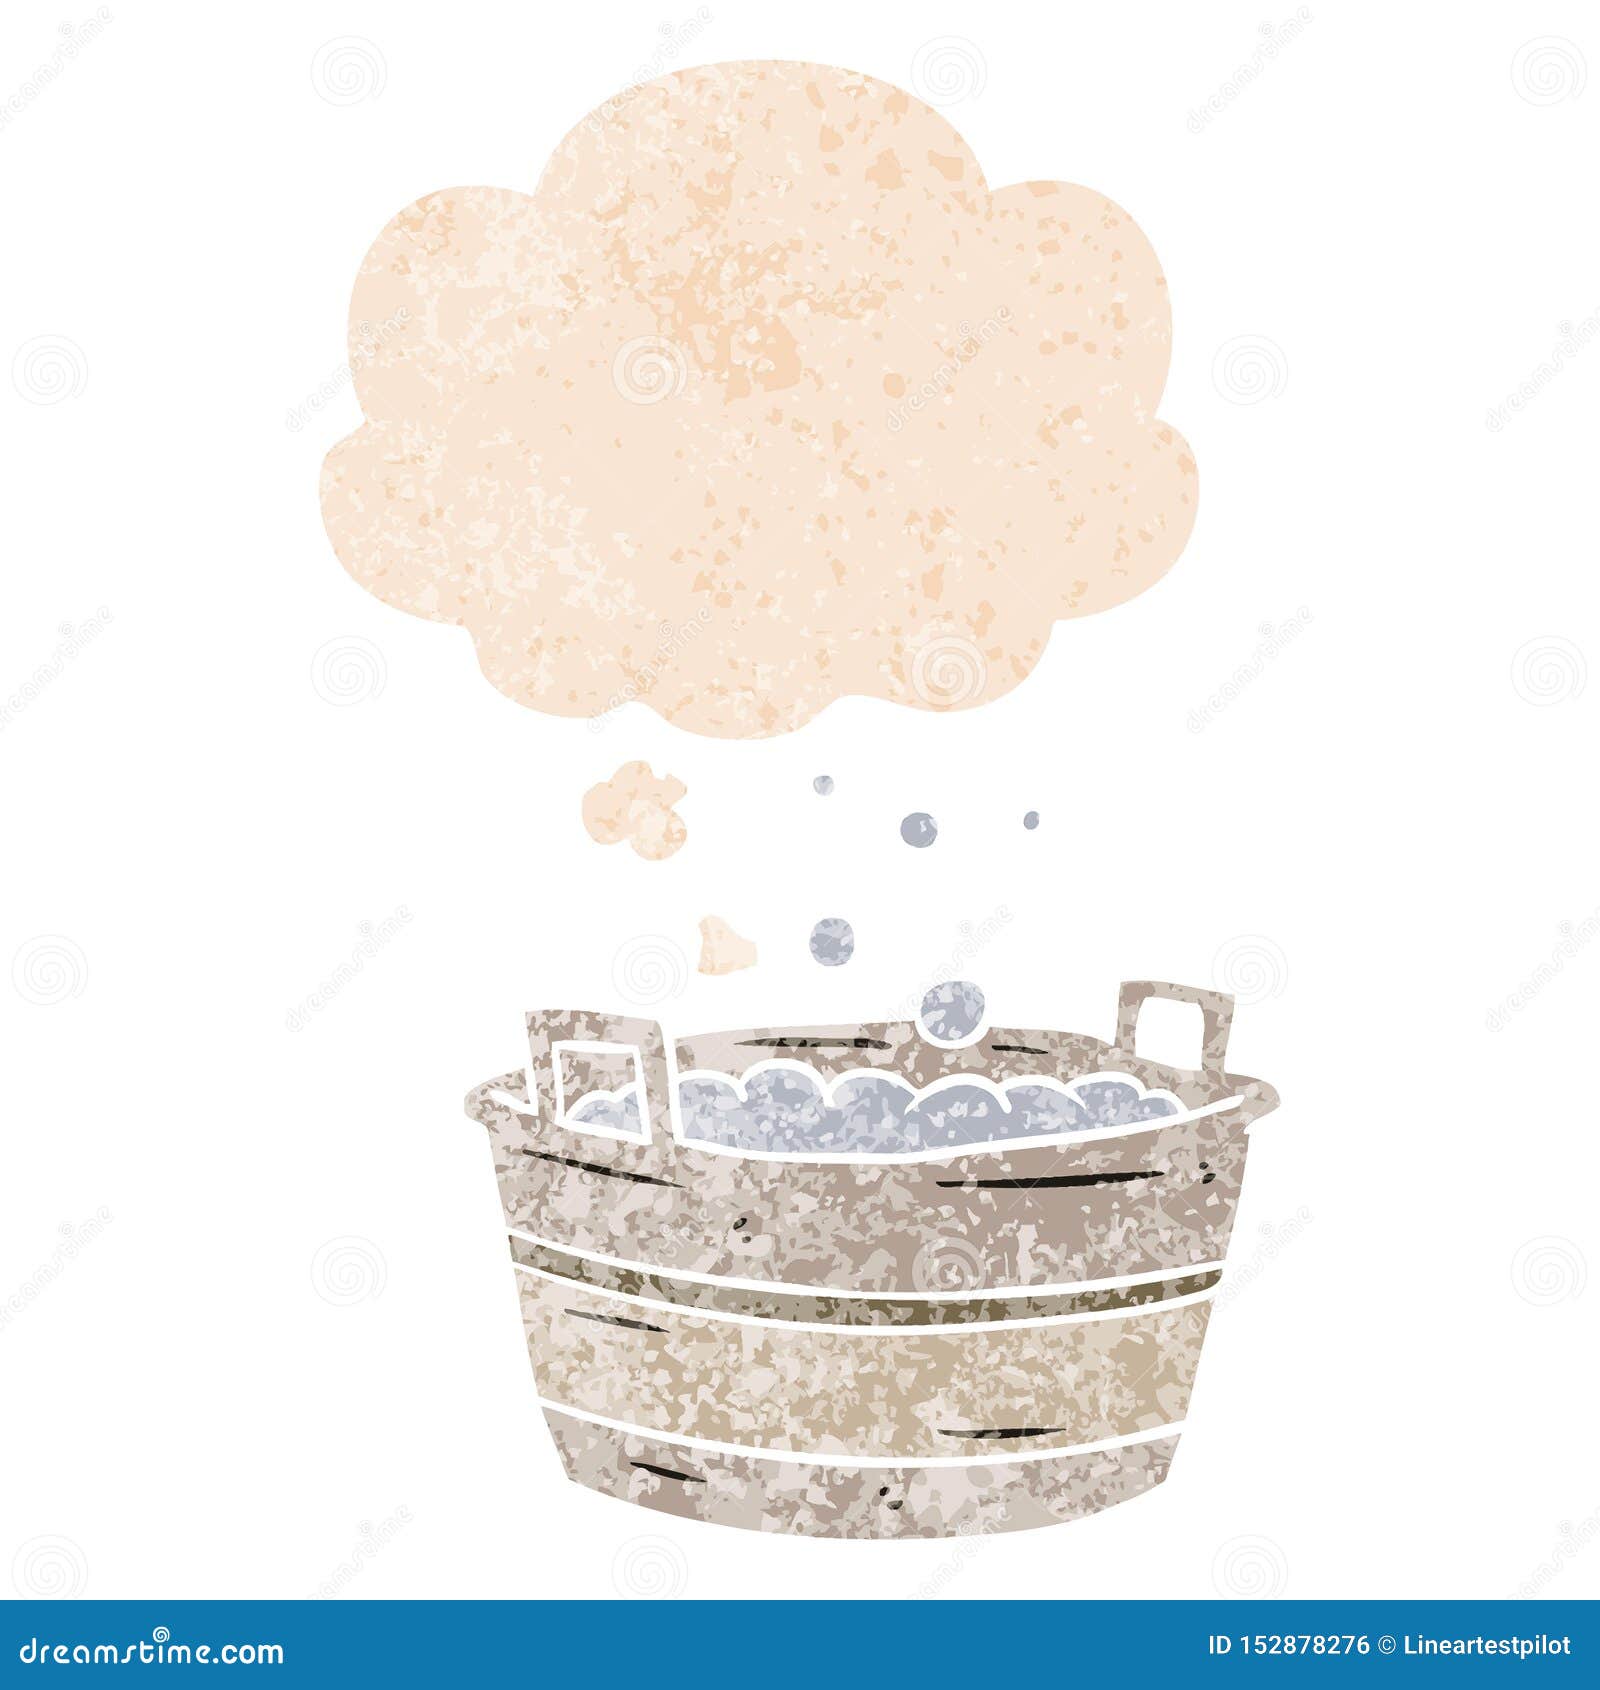 A Creative Cartoon Old Tin Bath and Thought Bubble in Retro Textured ...